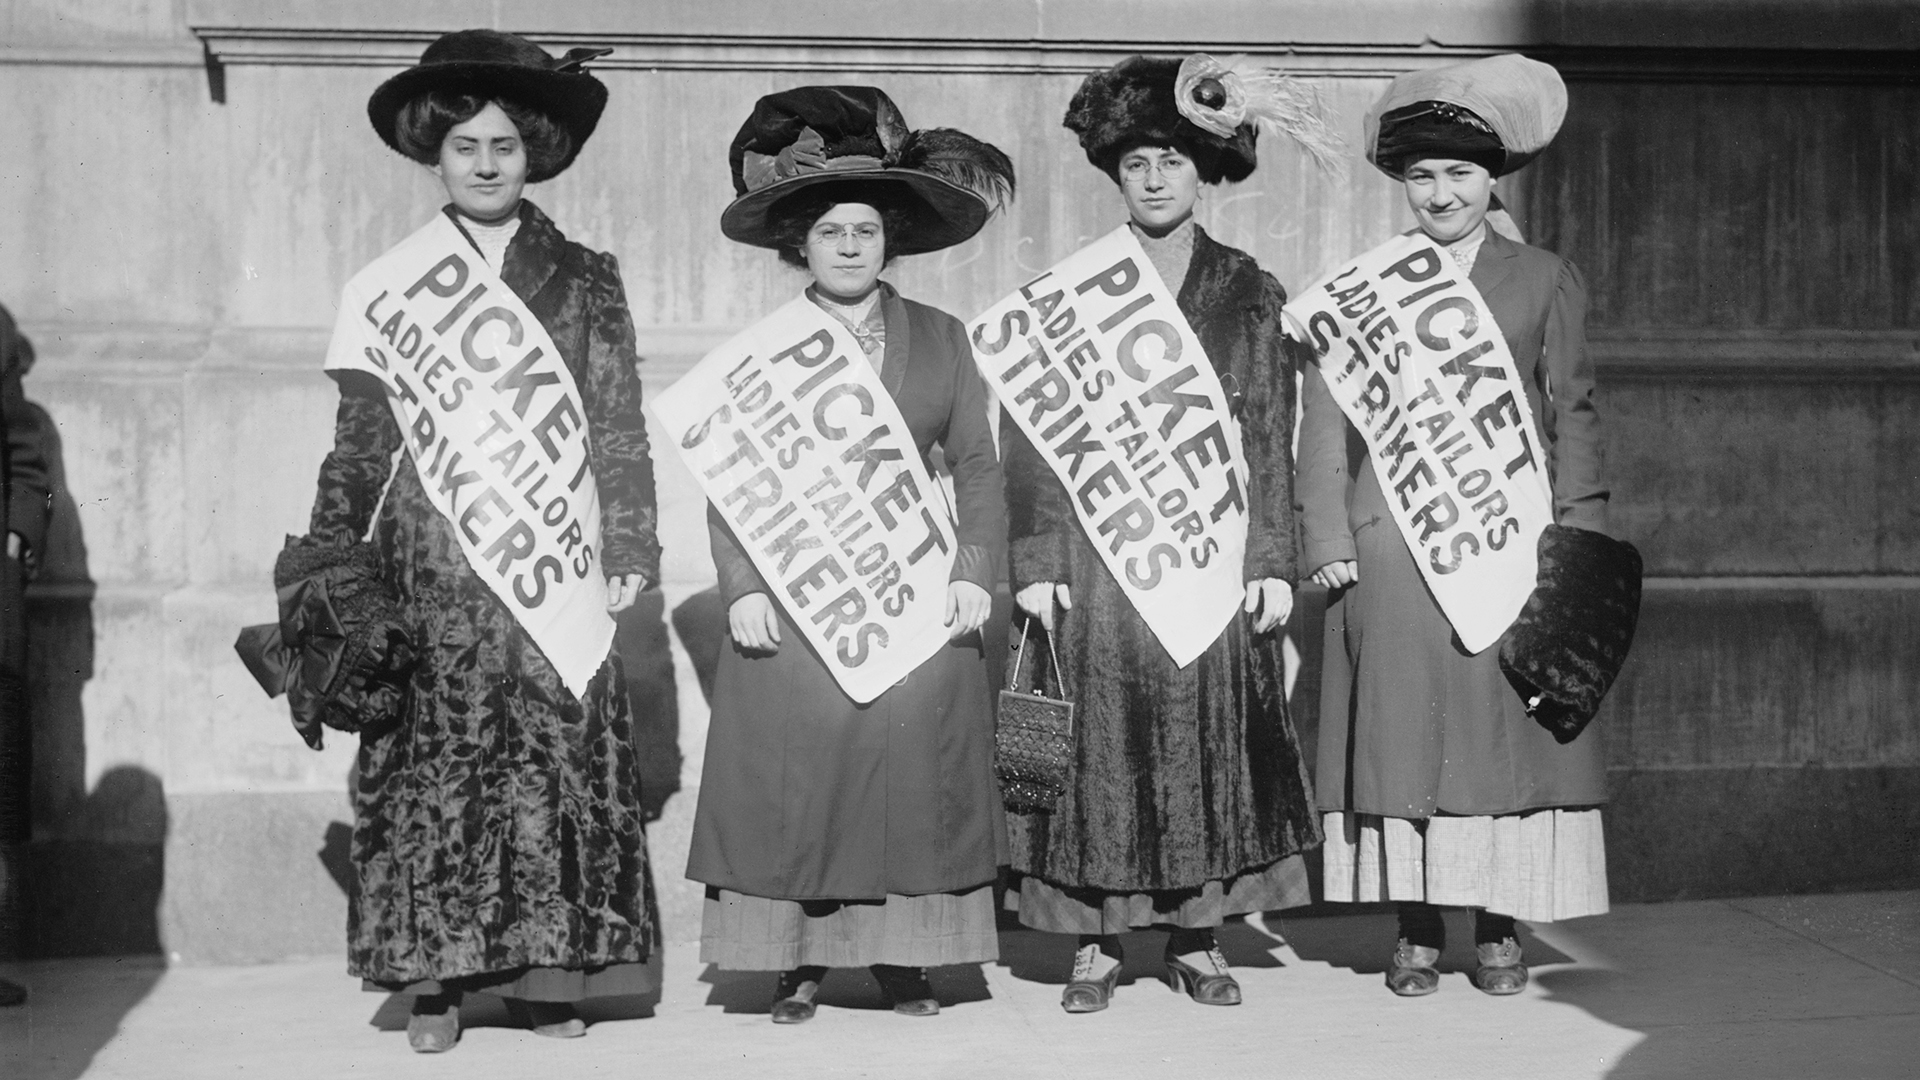 Four women strikers from the Ladies Tailors union on the picket line during the 1909 "Uprising of the 20,000,"a garment workers' strike in New York City.